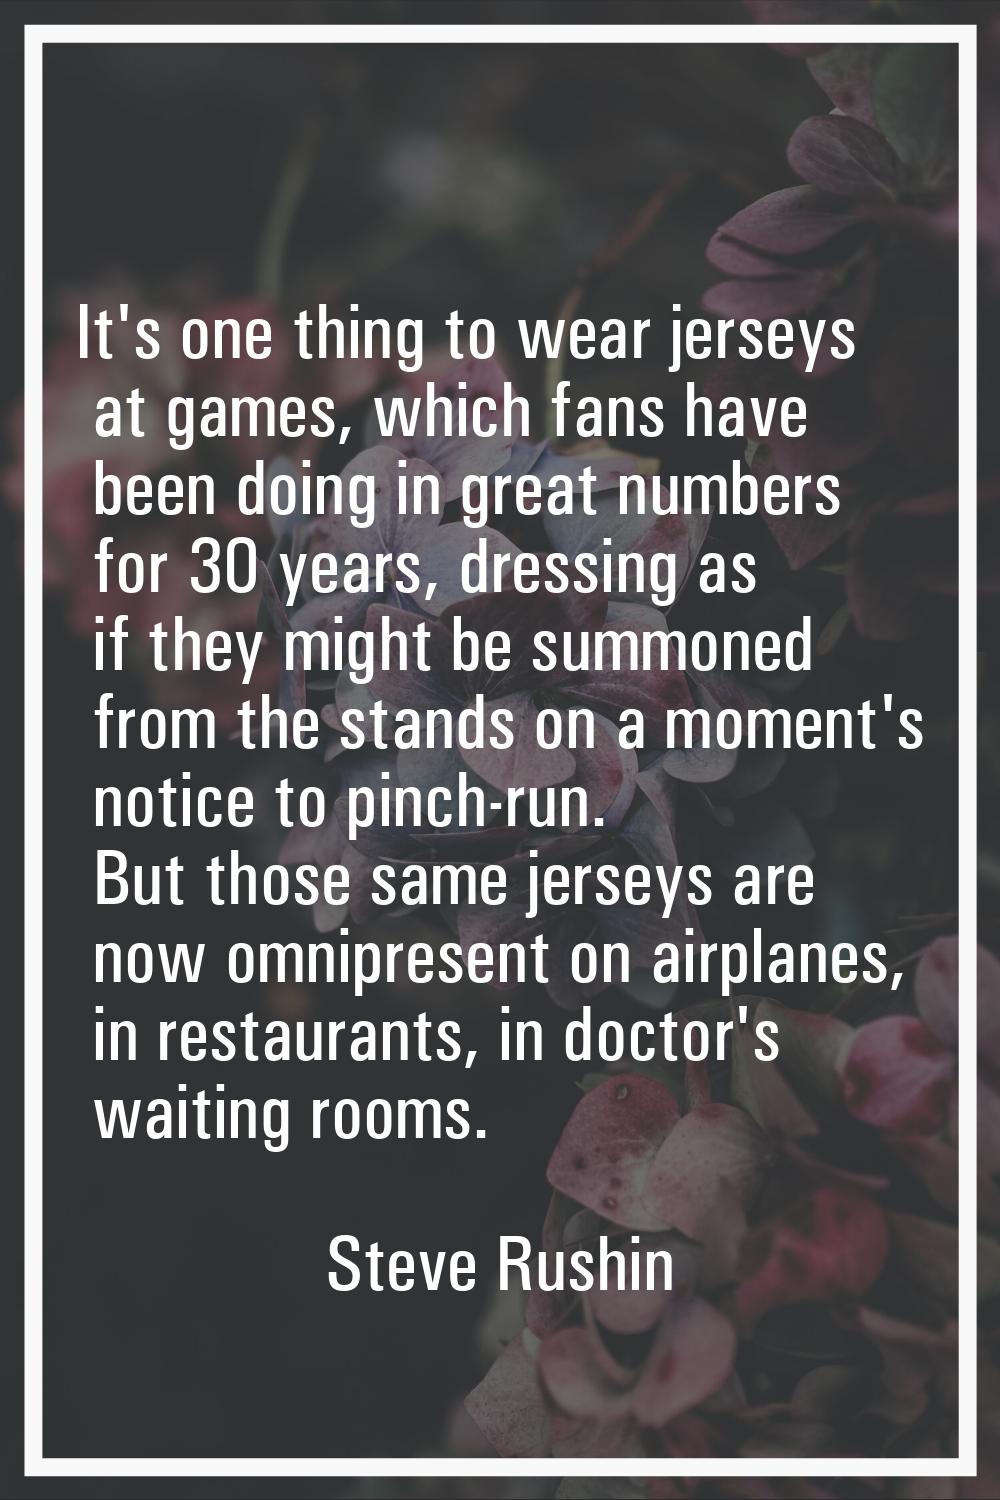 It's one thing to wear jerseys at games, which fans have been doing in great numbers for 30 years, 